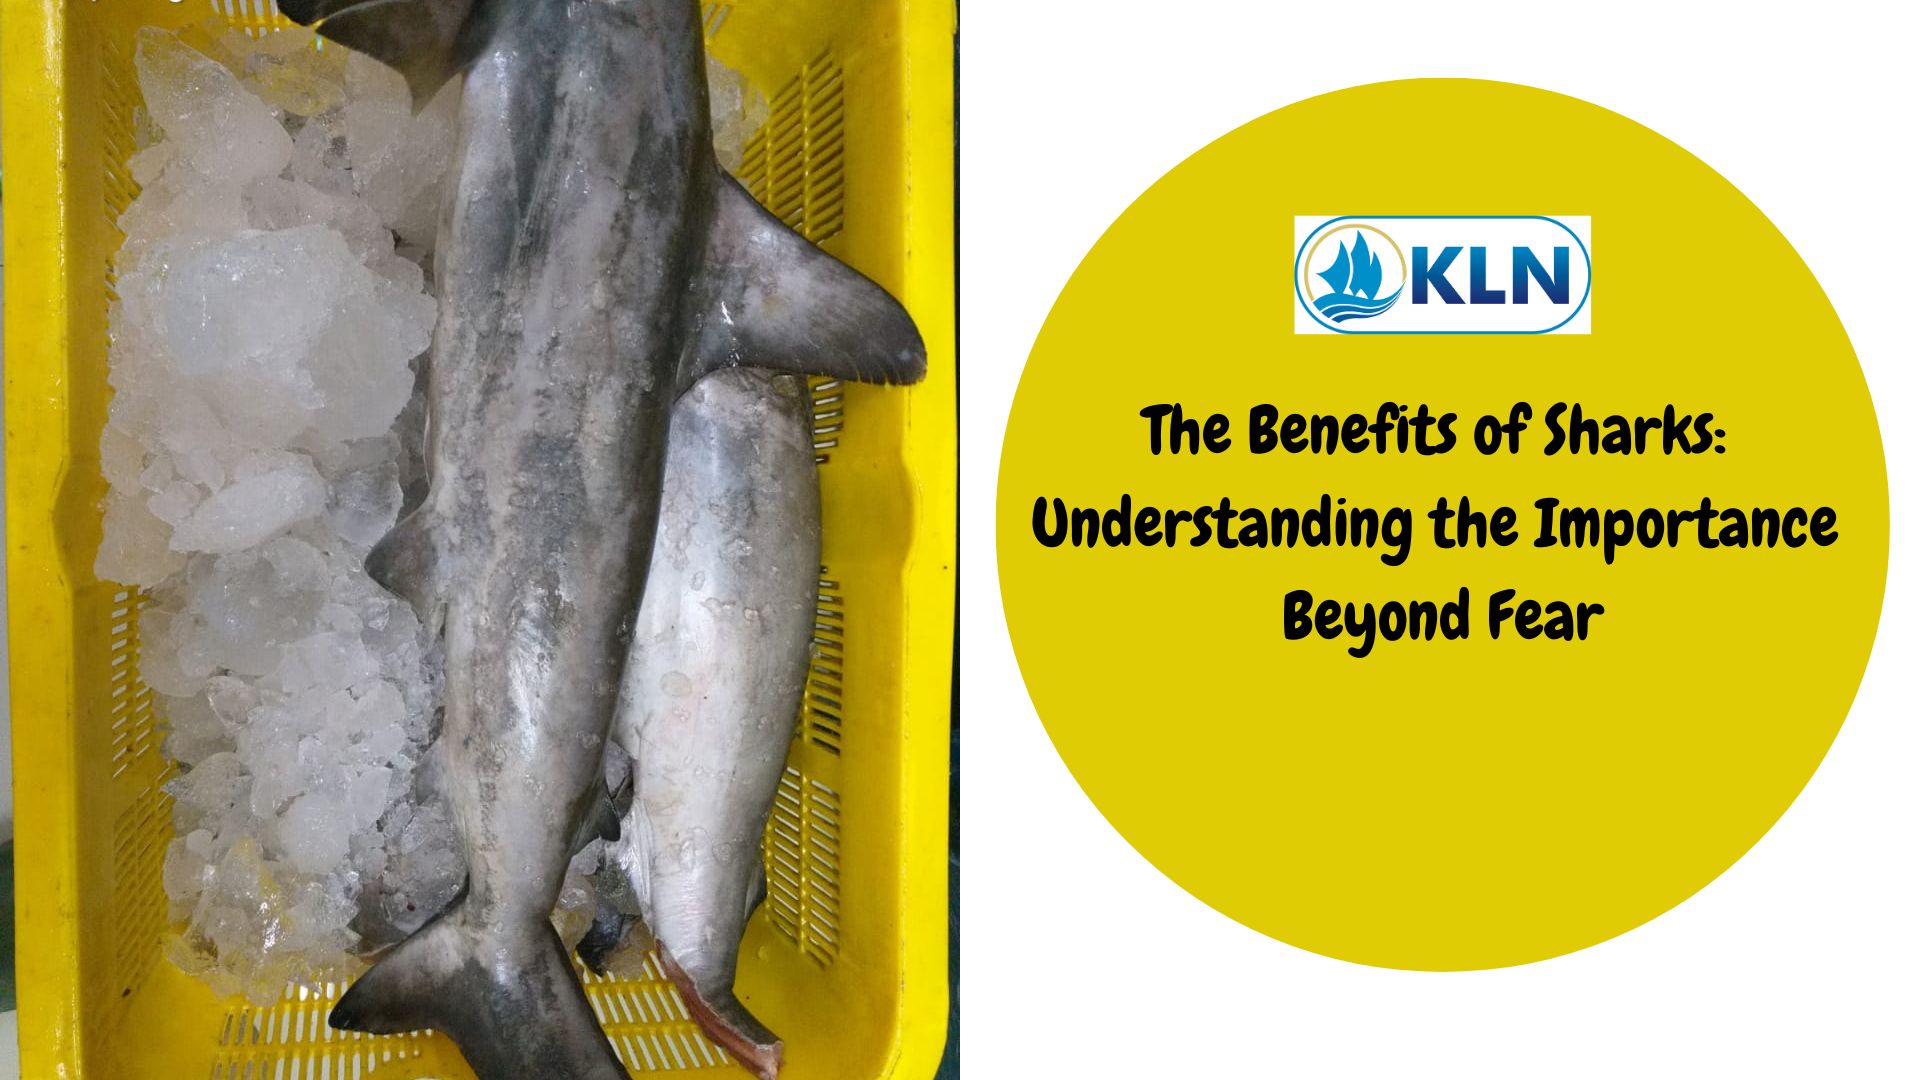 The Benefits of Sharks: Understanding the Importance Beyond Fear